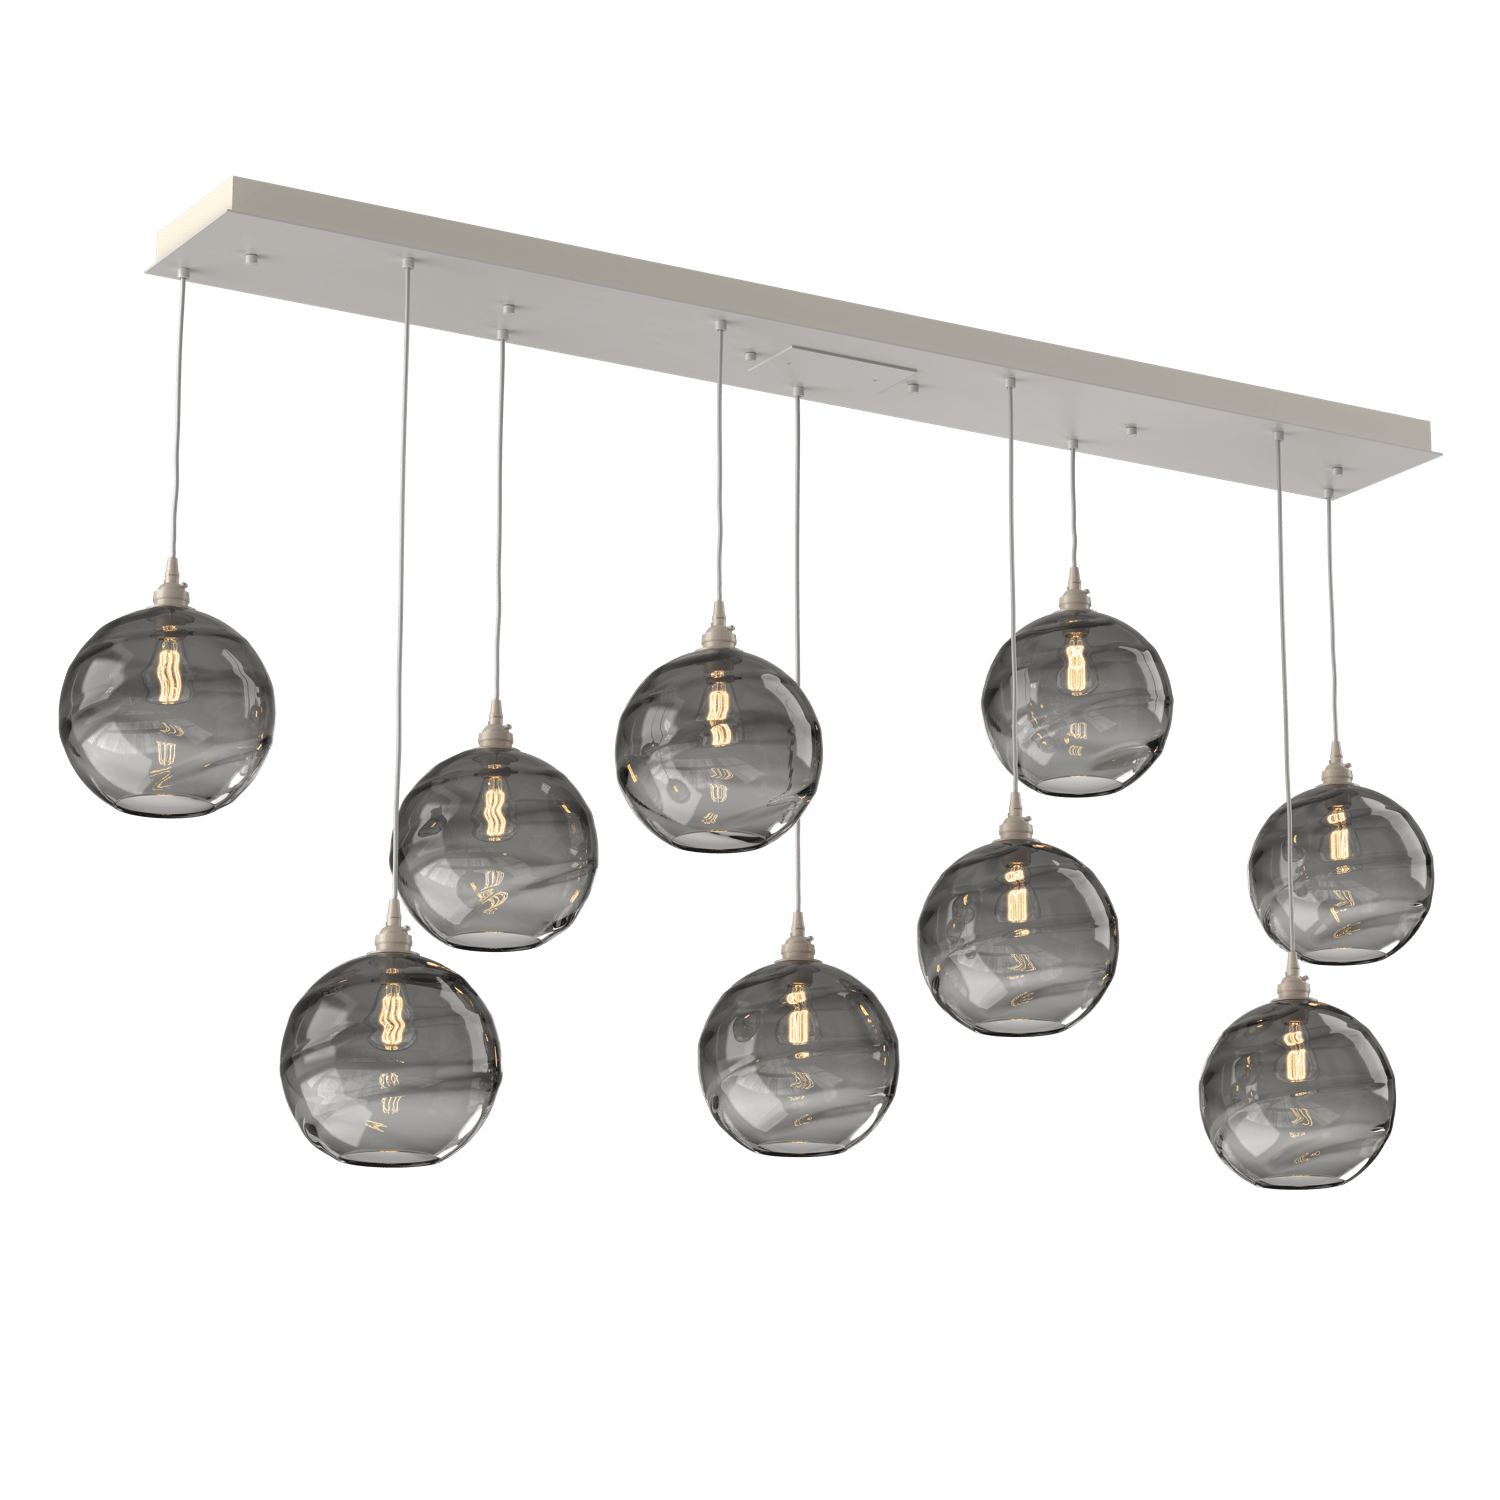 PLB0047-09-BS-OS-Hammerton-Studio-Optic-Blown-Glass-Terra-9-light-linear-pendant-chandelier-with-metallic-beige-silver-finish-and-optic-smoke-blown-glass-shades-and-incandescent-lamping